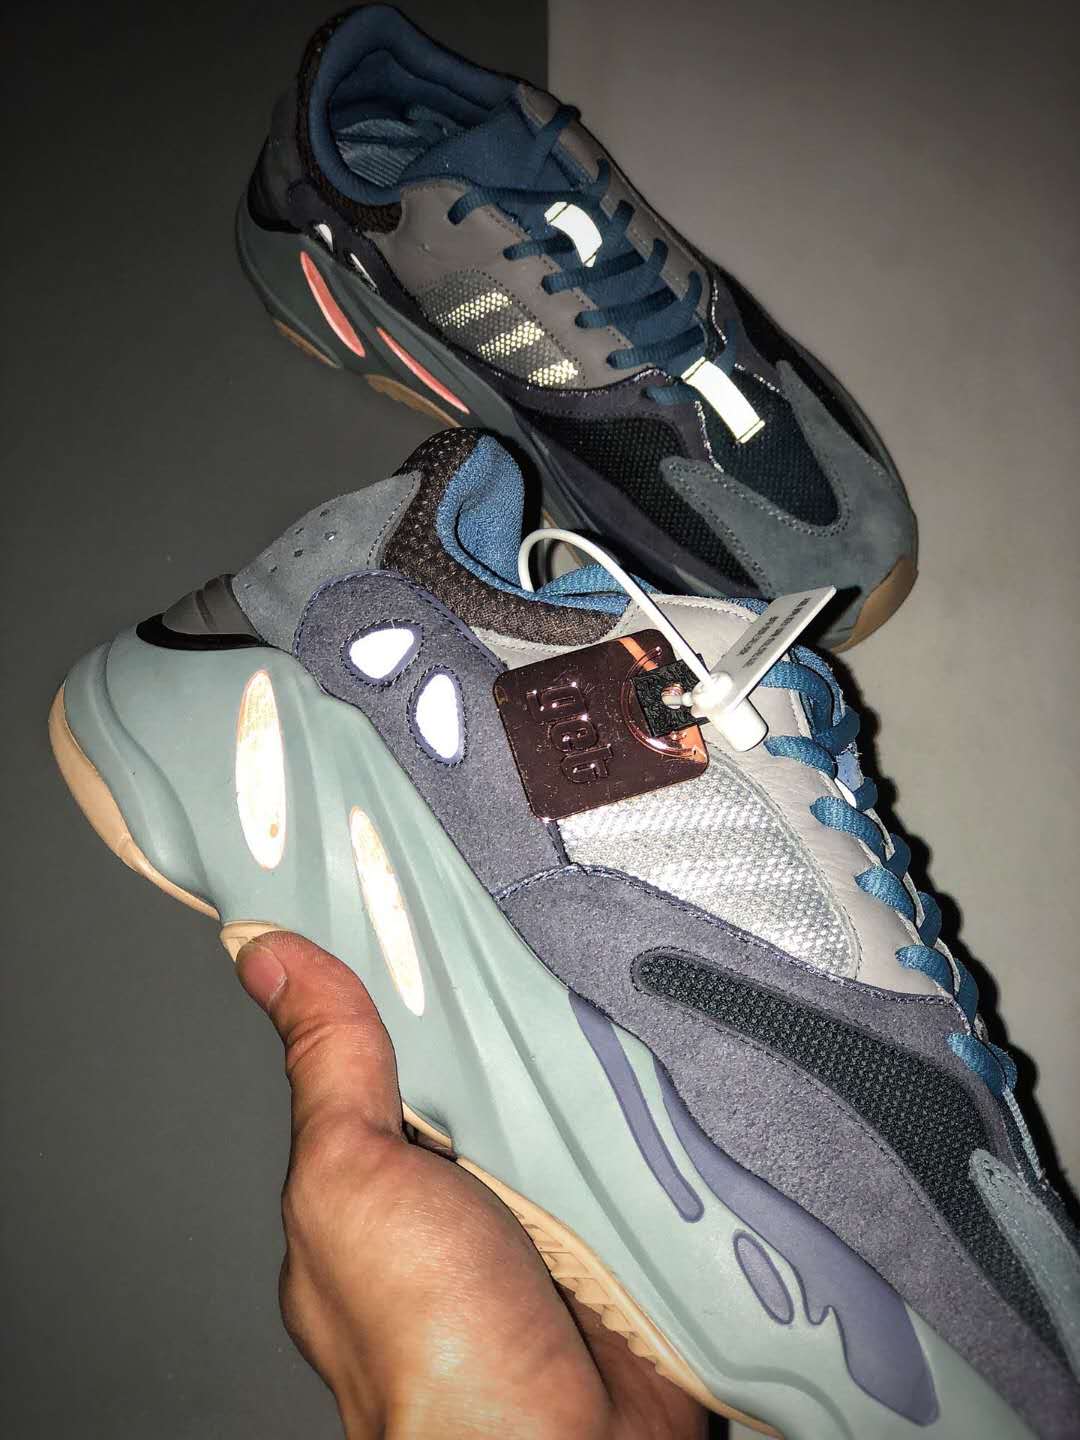 Adidas Yeezy Boost 700 'Carbon Blue' FW2498 - Shop Now!